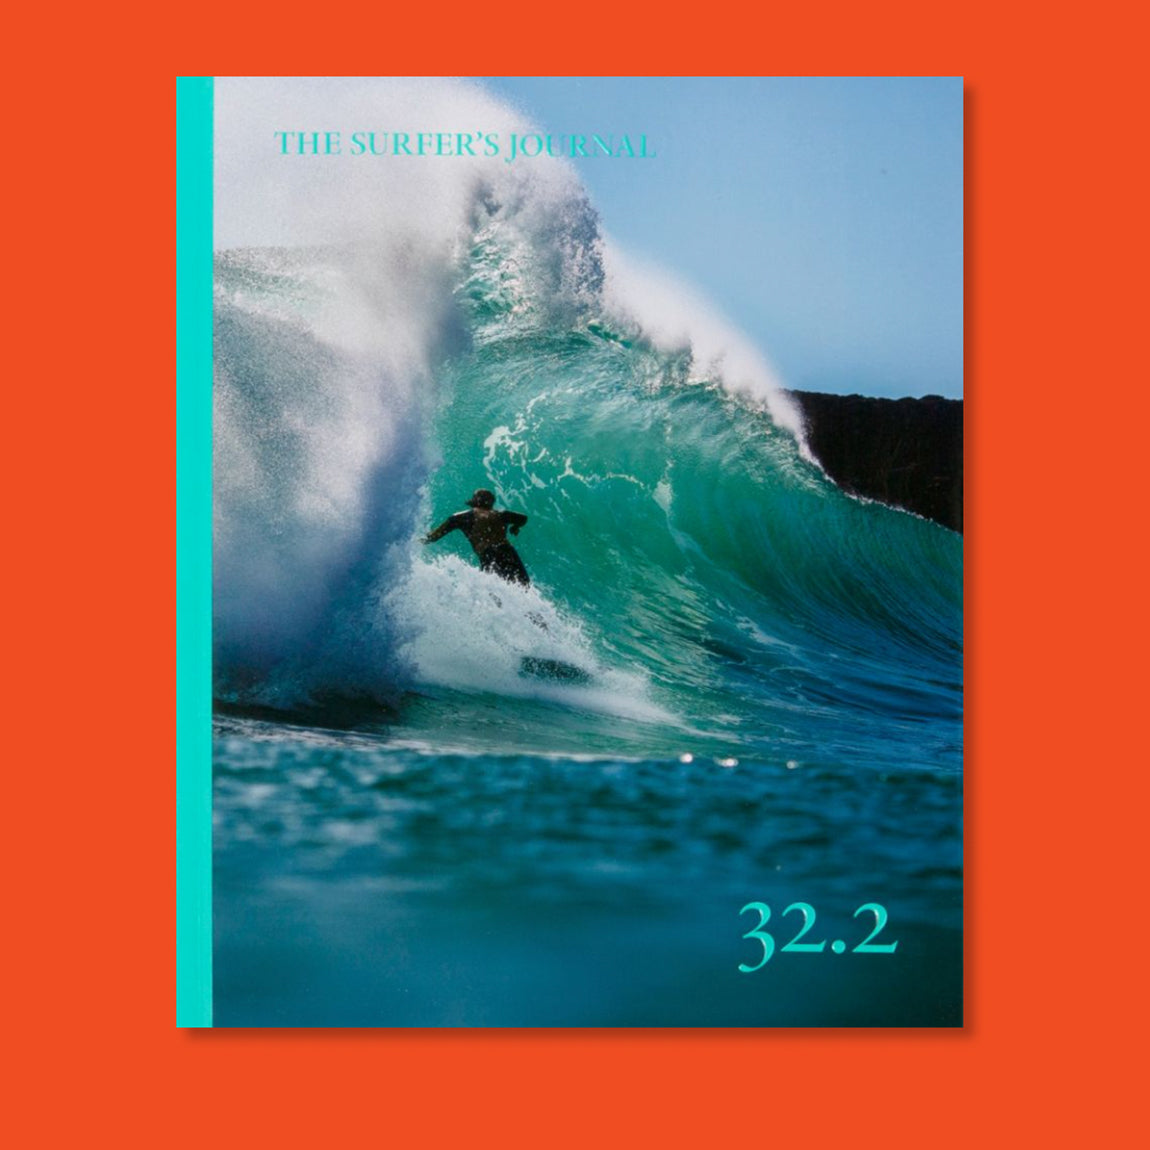 THE SURFER'S JOURNAL - ISSUE 32.2